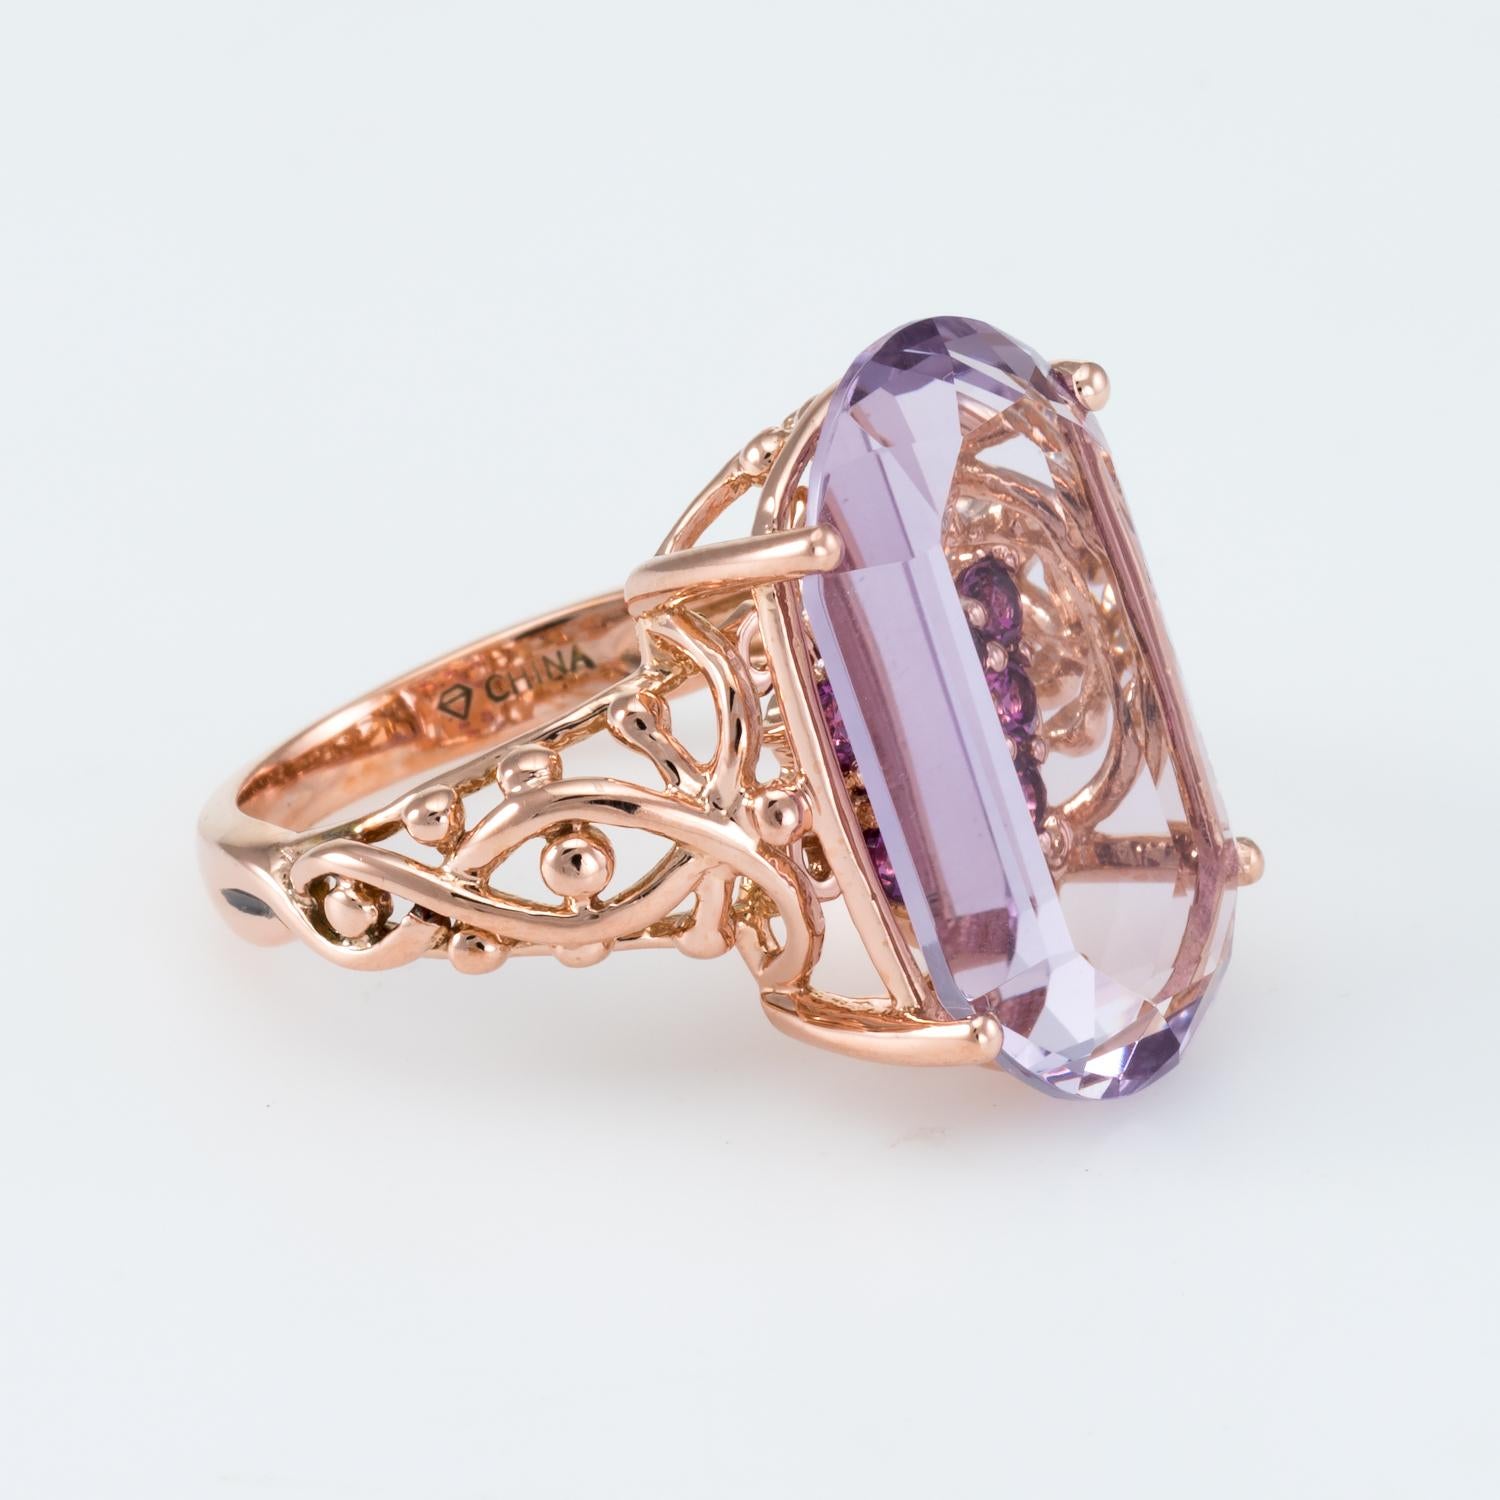 Elegant estate cocktail ring, crafted in 14 karat rose gold. 

Rubies total an estimated 0.32 carats, accented with an estimated 0.02 carats of diamonds (estimated at I color and I1 clarity). The amethyst measures 20mm x 12mm and is estimated at 14